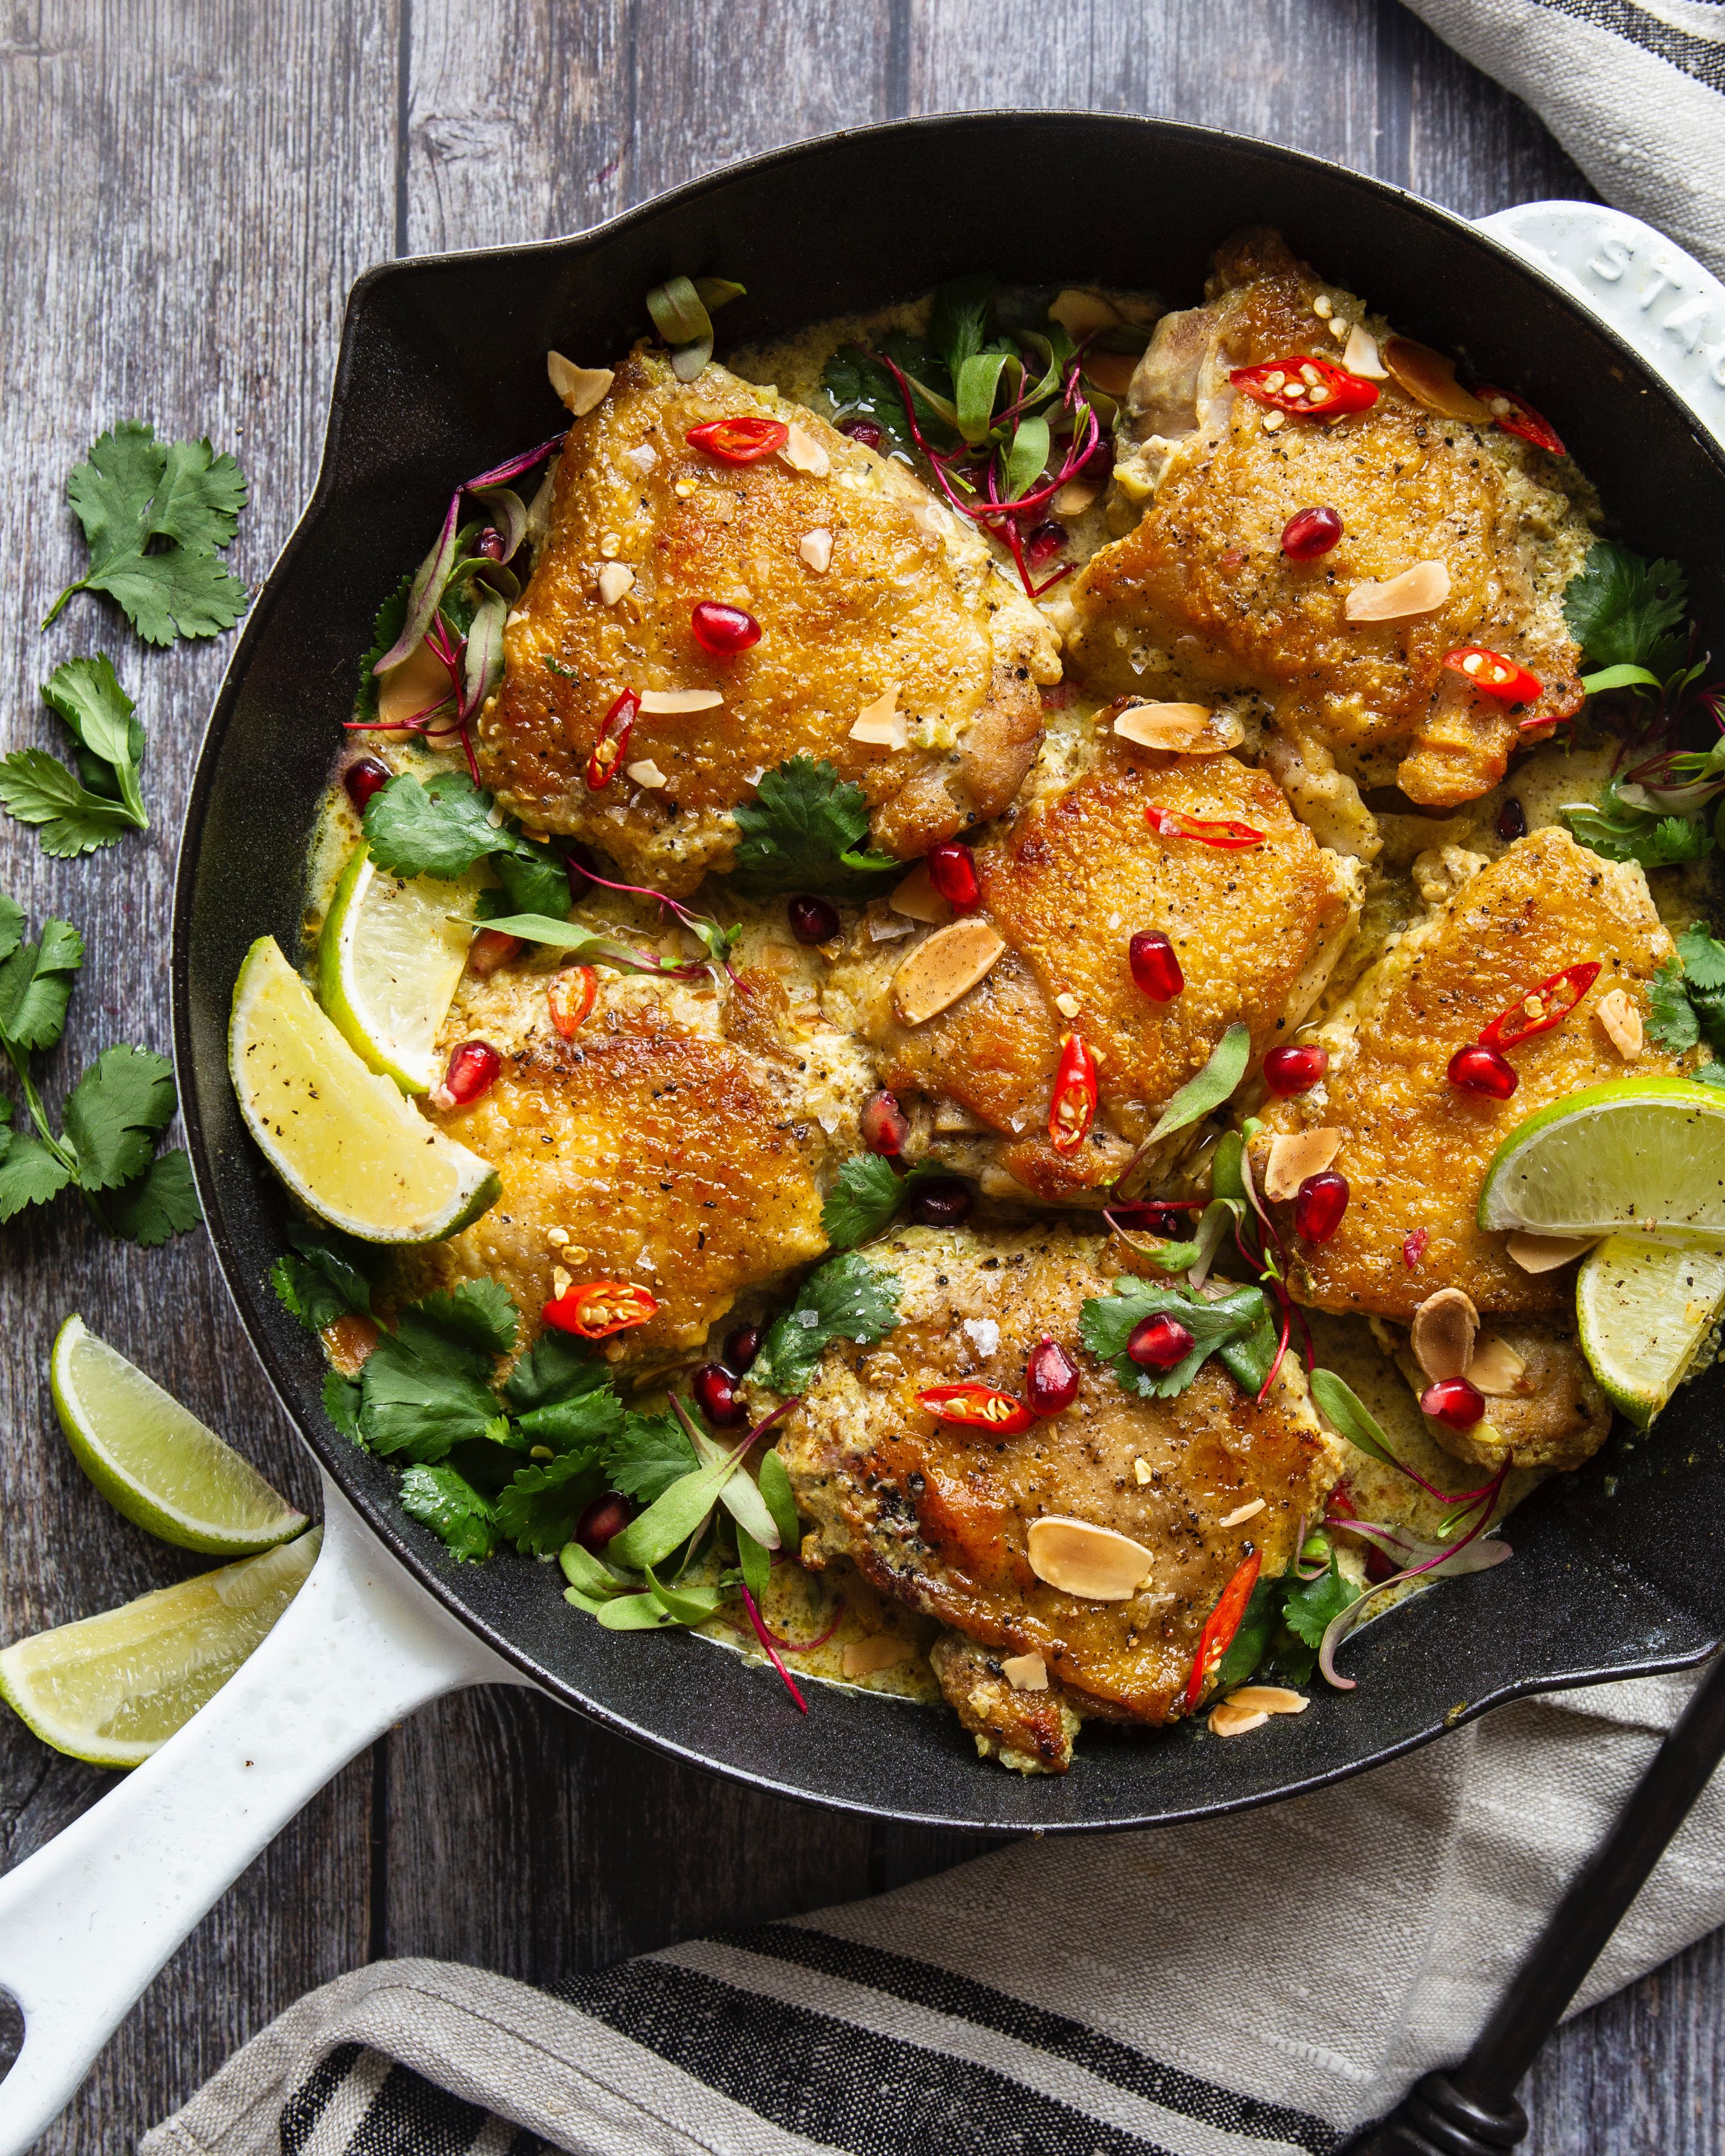 Crispy Chicken Thighs with Almond Milk Curry recipe by